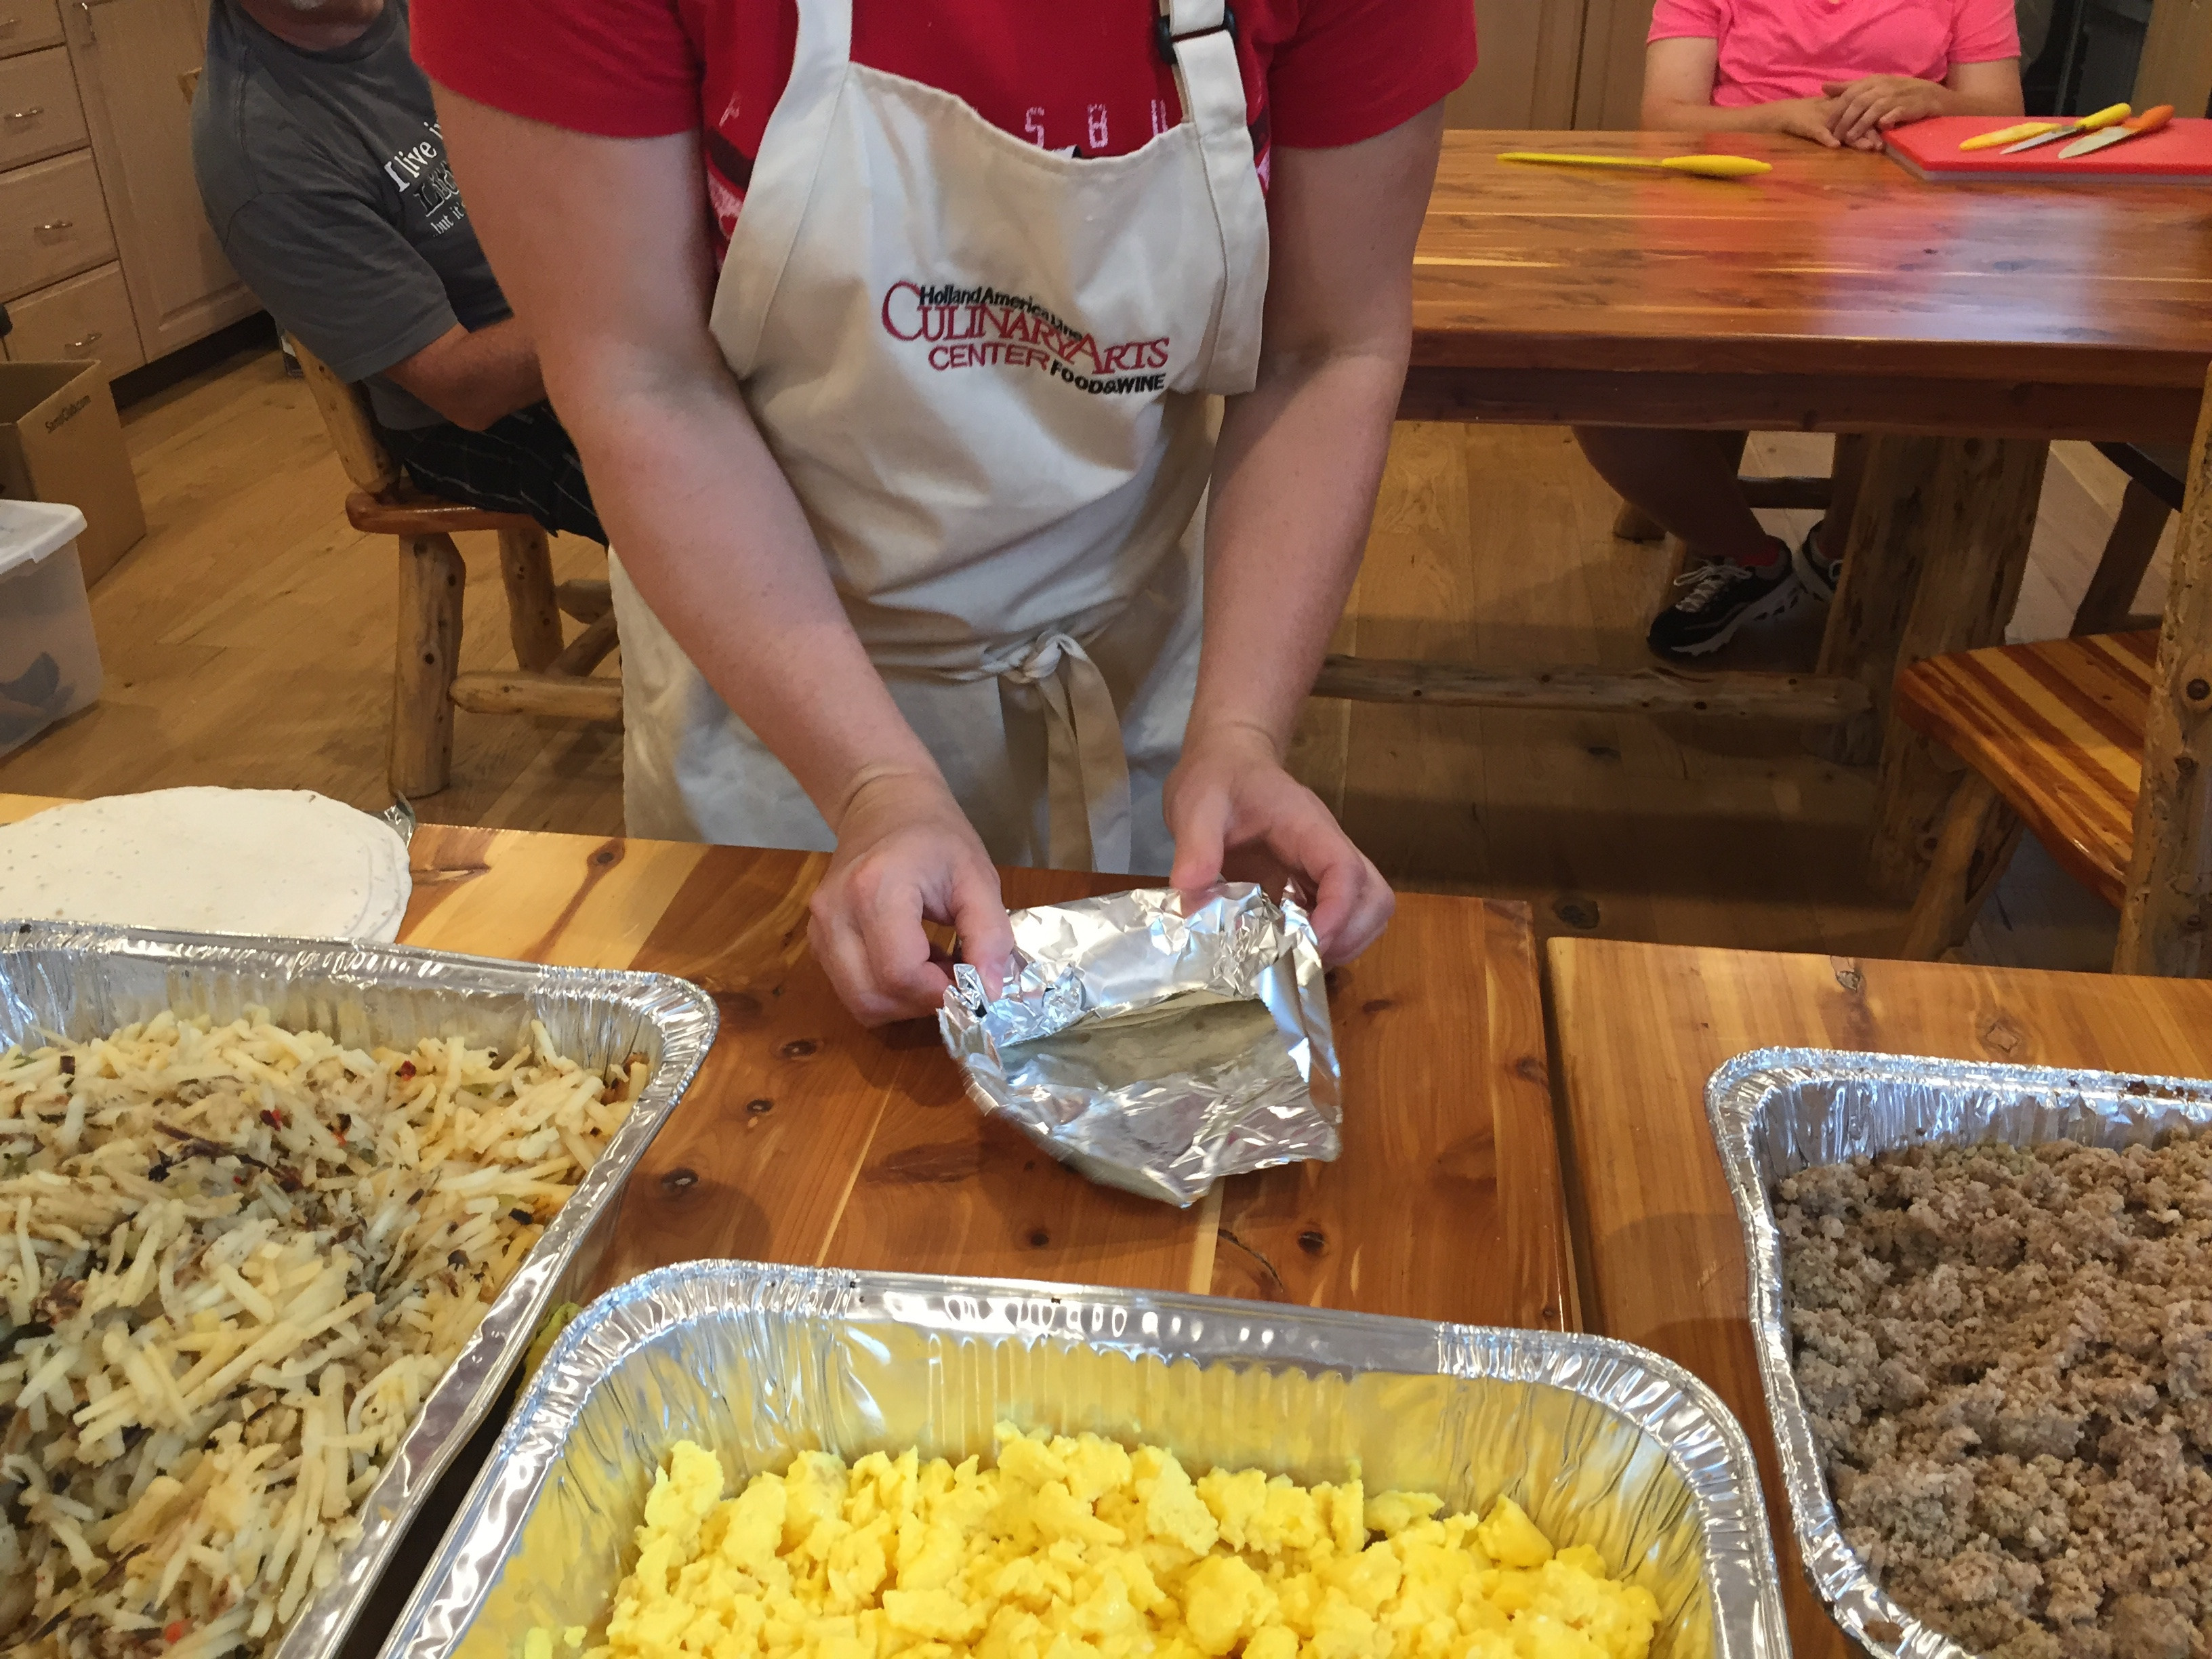 Breakfast Burritos For A Crowd
 Breakfast Burritos for a Crowd